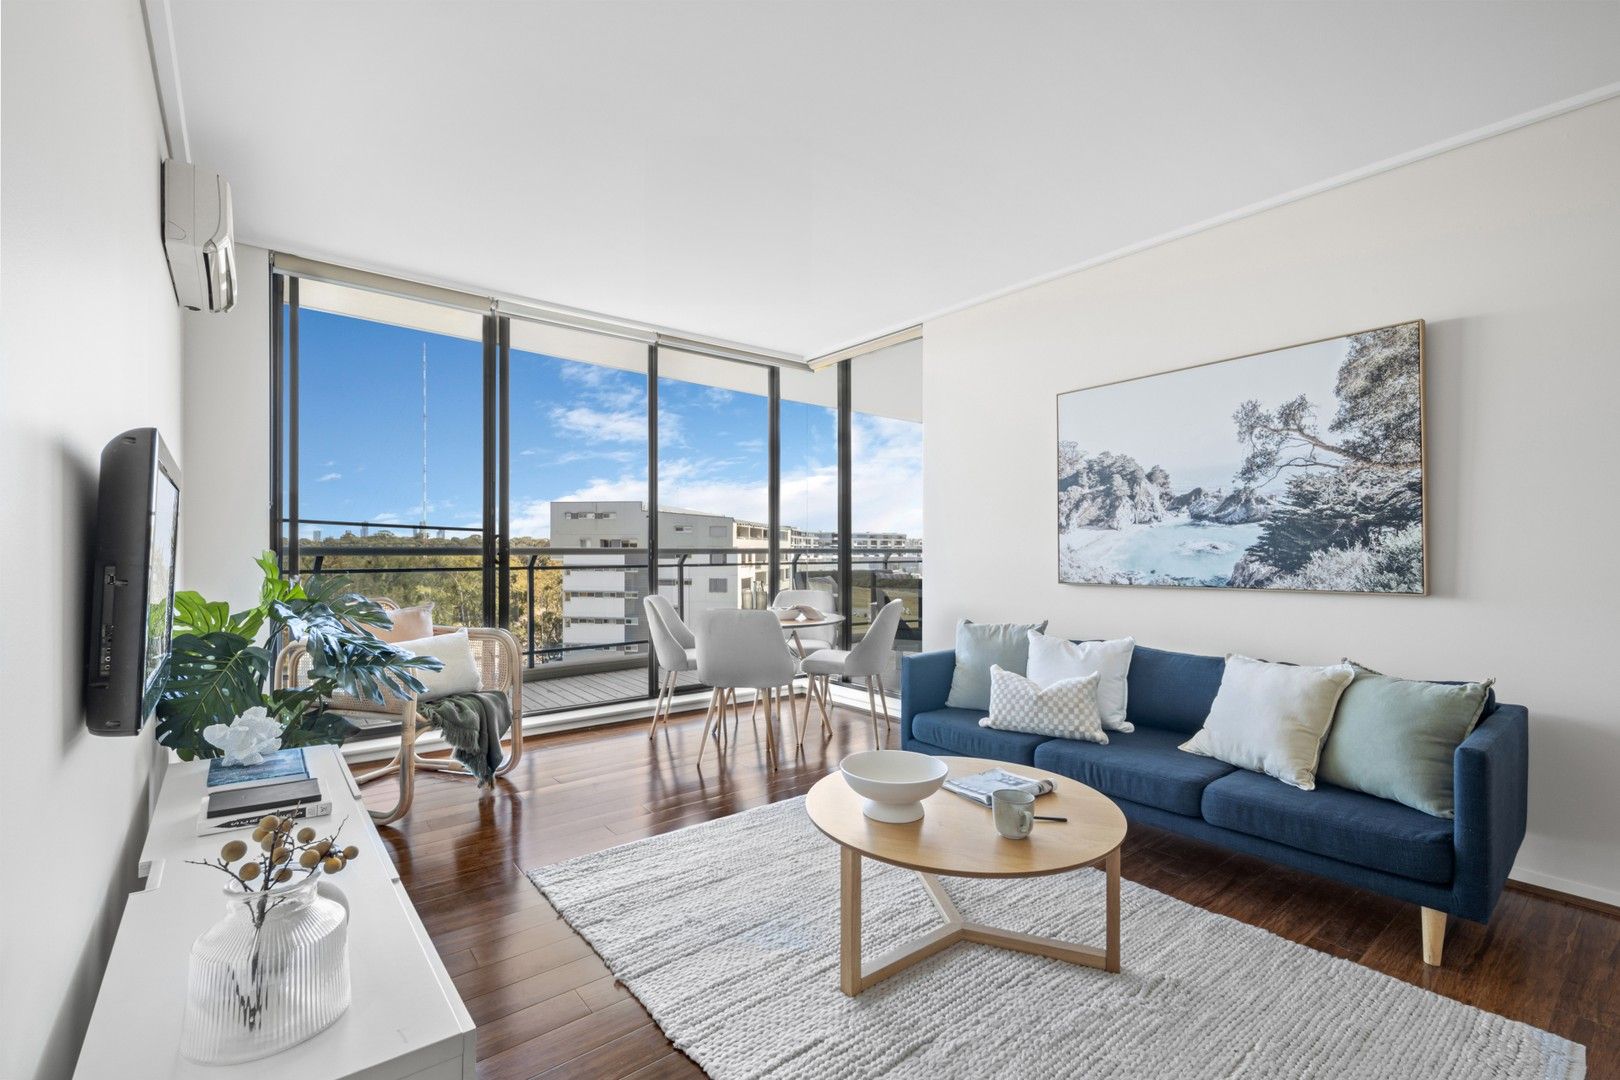 2 bedrooms Apartment / Unit / Flat in 96/27 Bennelong Parkway WENTWORTH POINT NSW, 2127